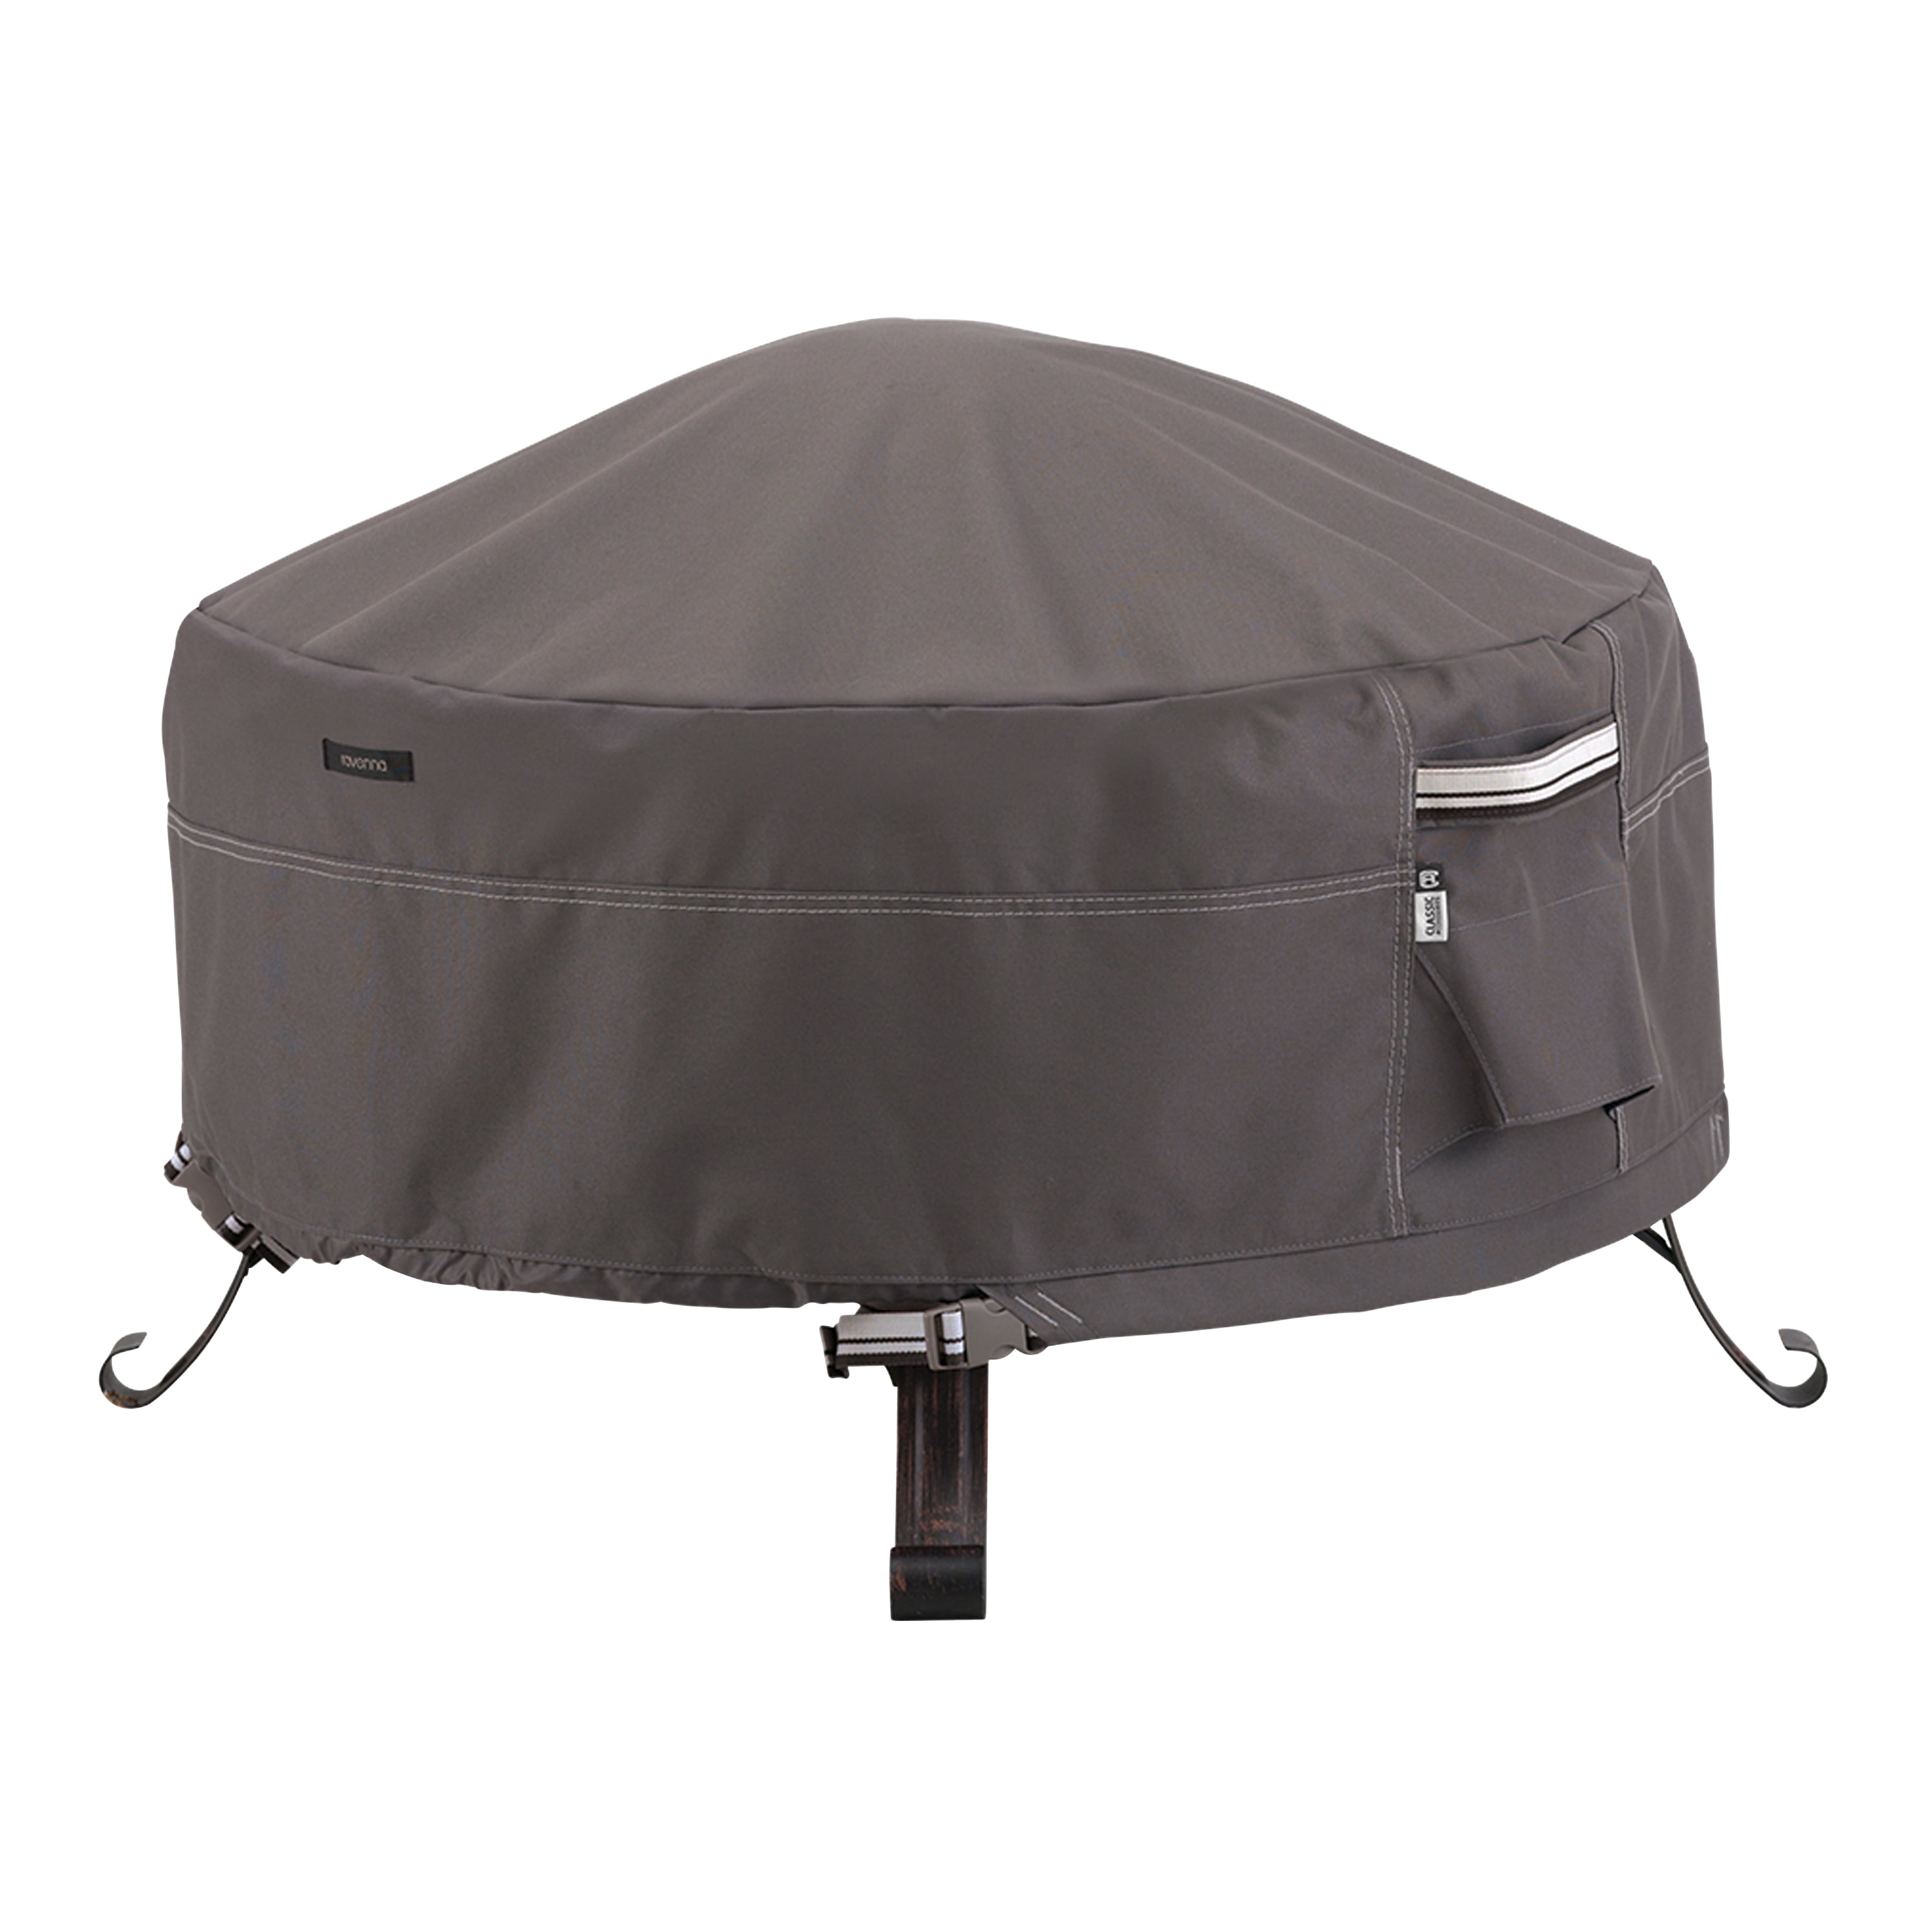 Full Coverage Round Fire Pit Cover, Canvas Fire Pit Cover